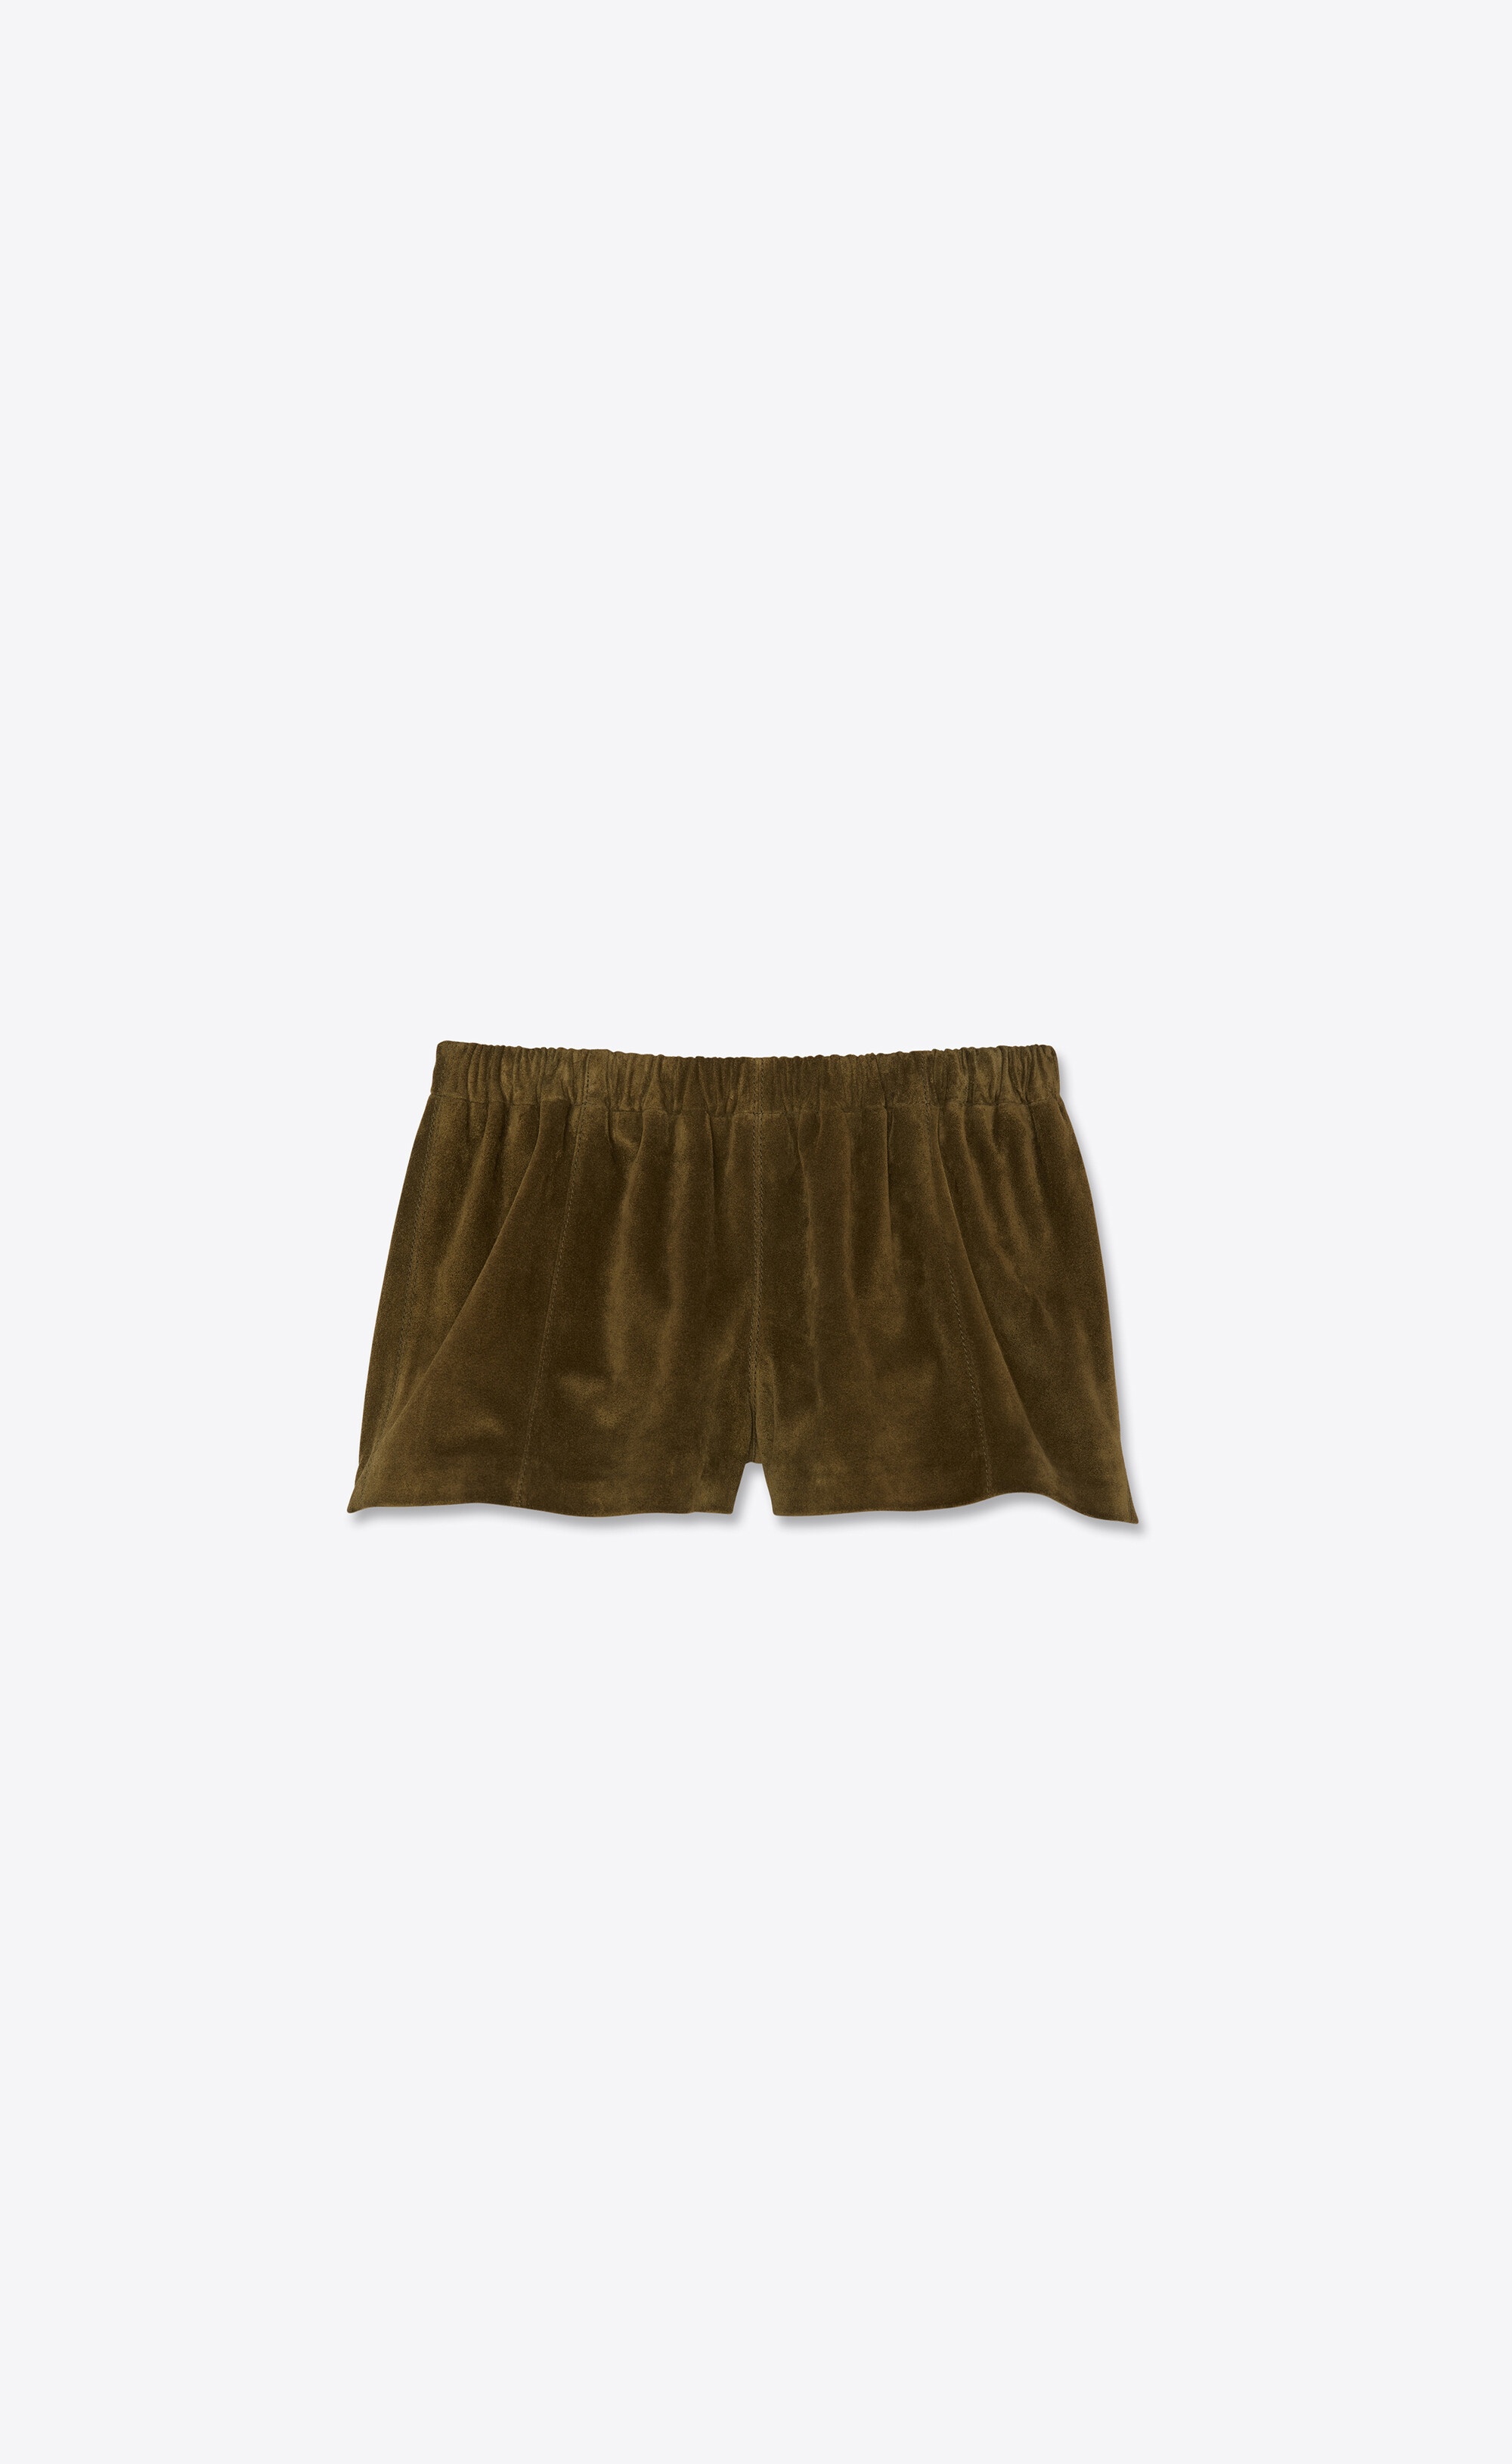 mini shorts in vintage suede and lizard skin - 1